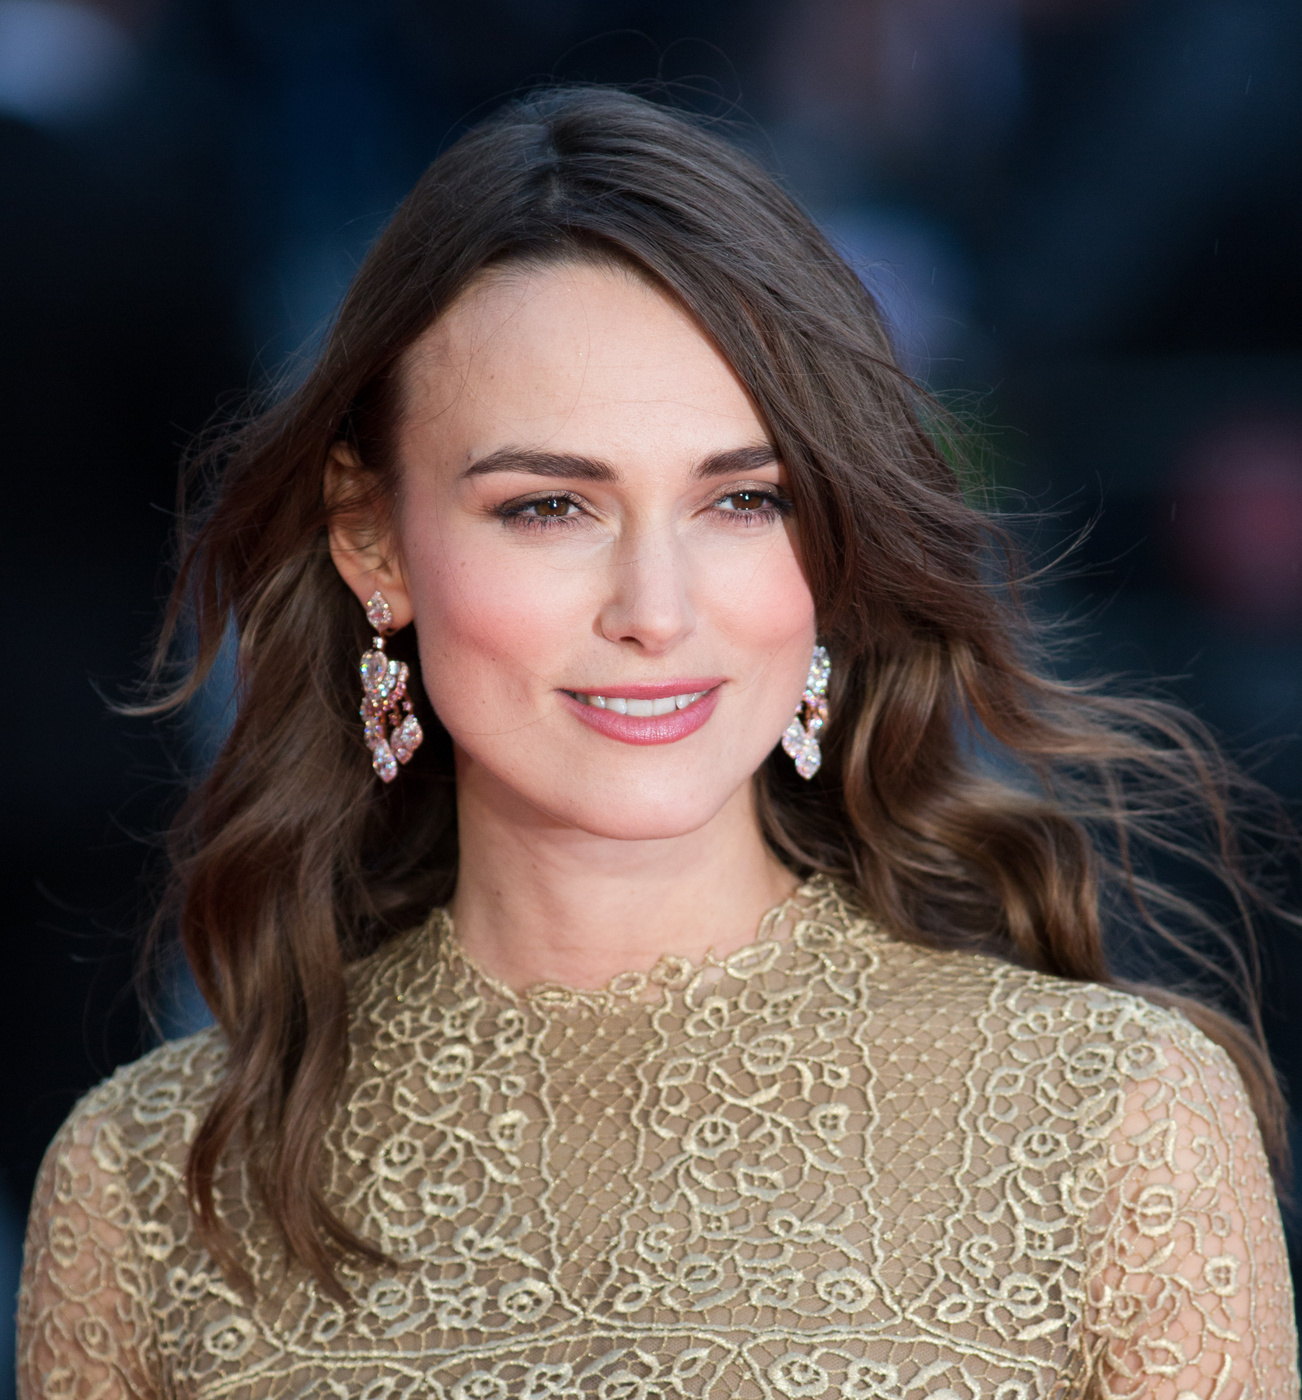 Well Played/ Fug or Fab: Keira Knightley at The Imitation Game Photocall and Premiere